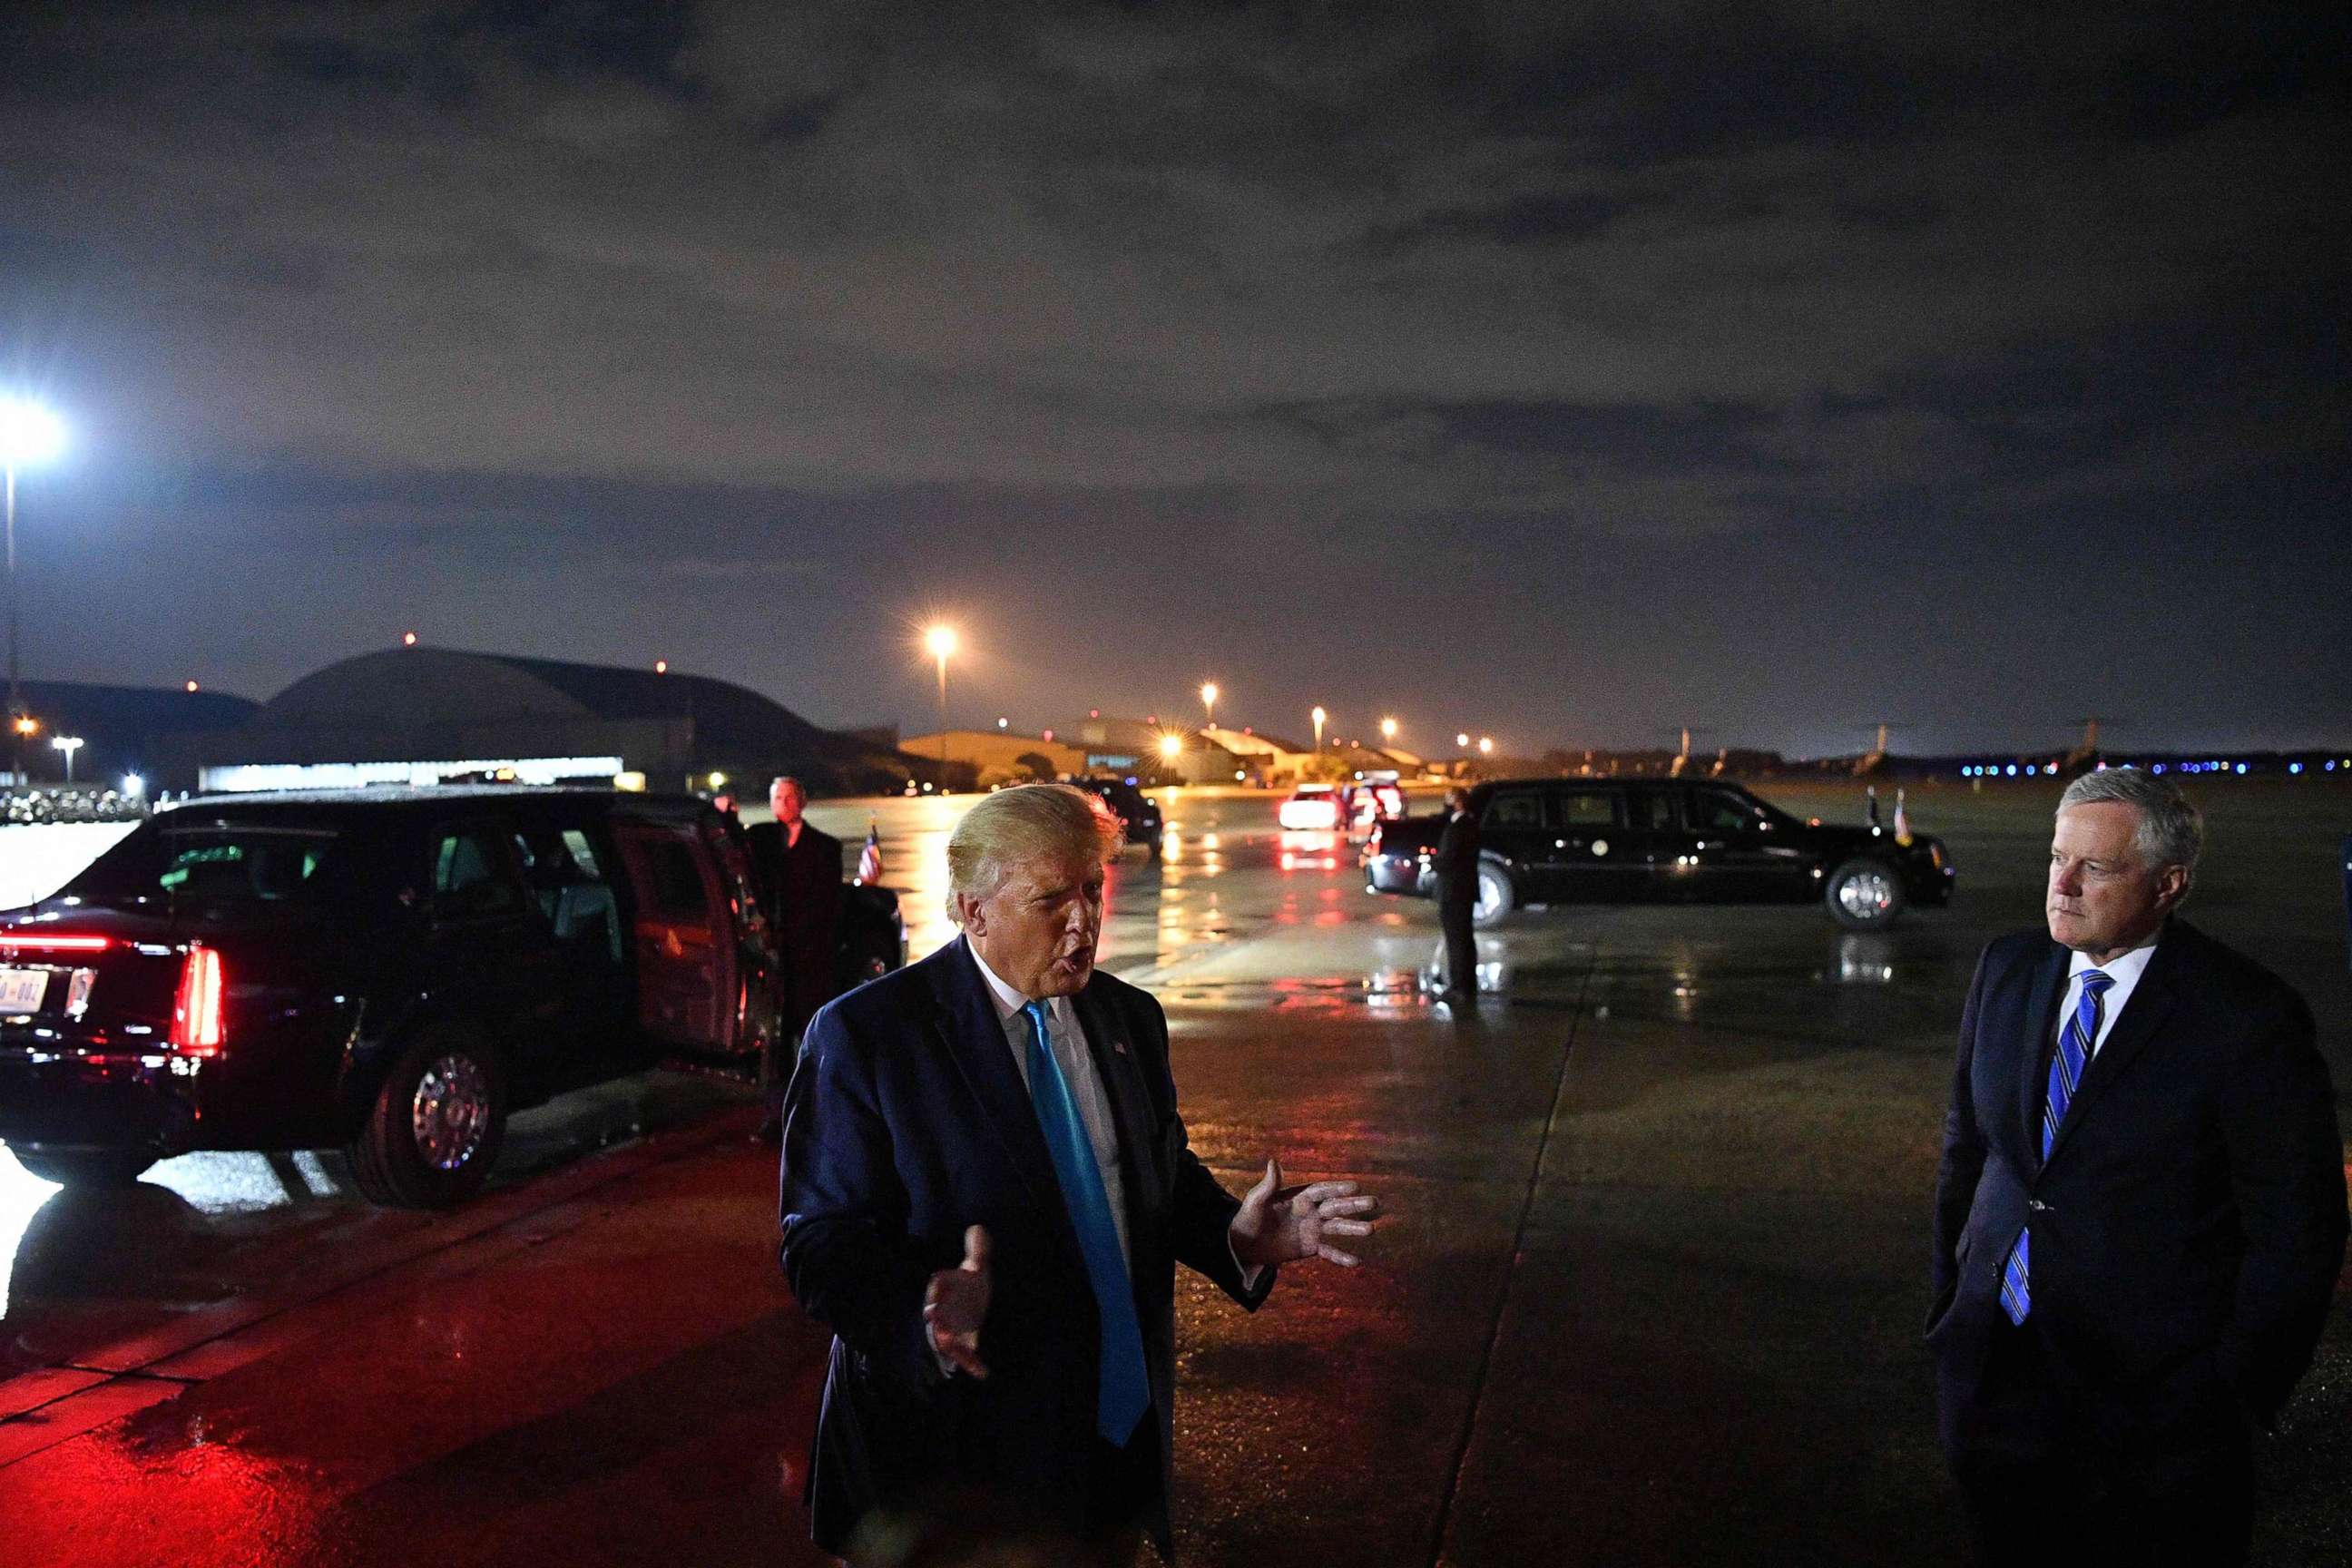 PHOTO: President Donald Trump, next to White House chief of staff Mark Meadows, speaks to reporters upon arrival at Andrews Air Force Base in Maryland on Sept. 3, 2020.